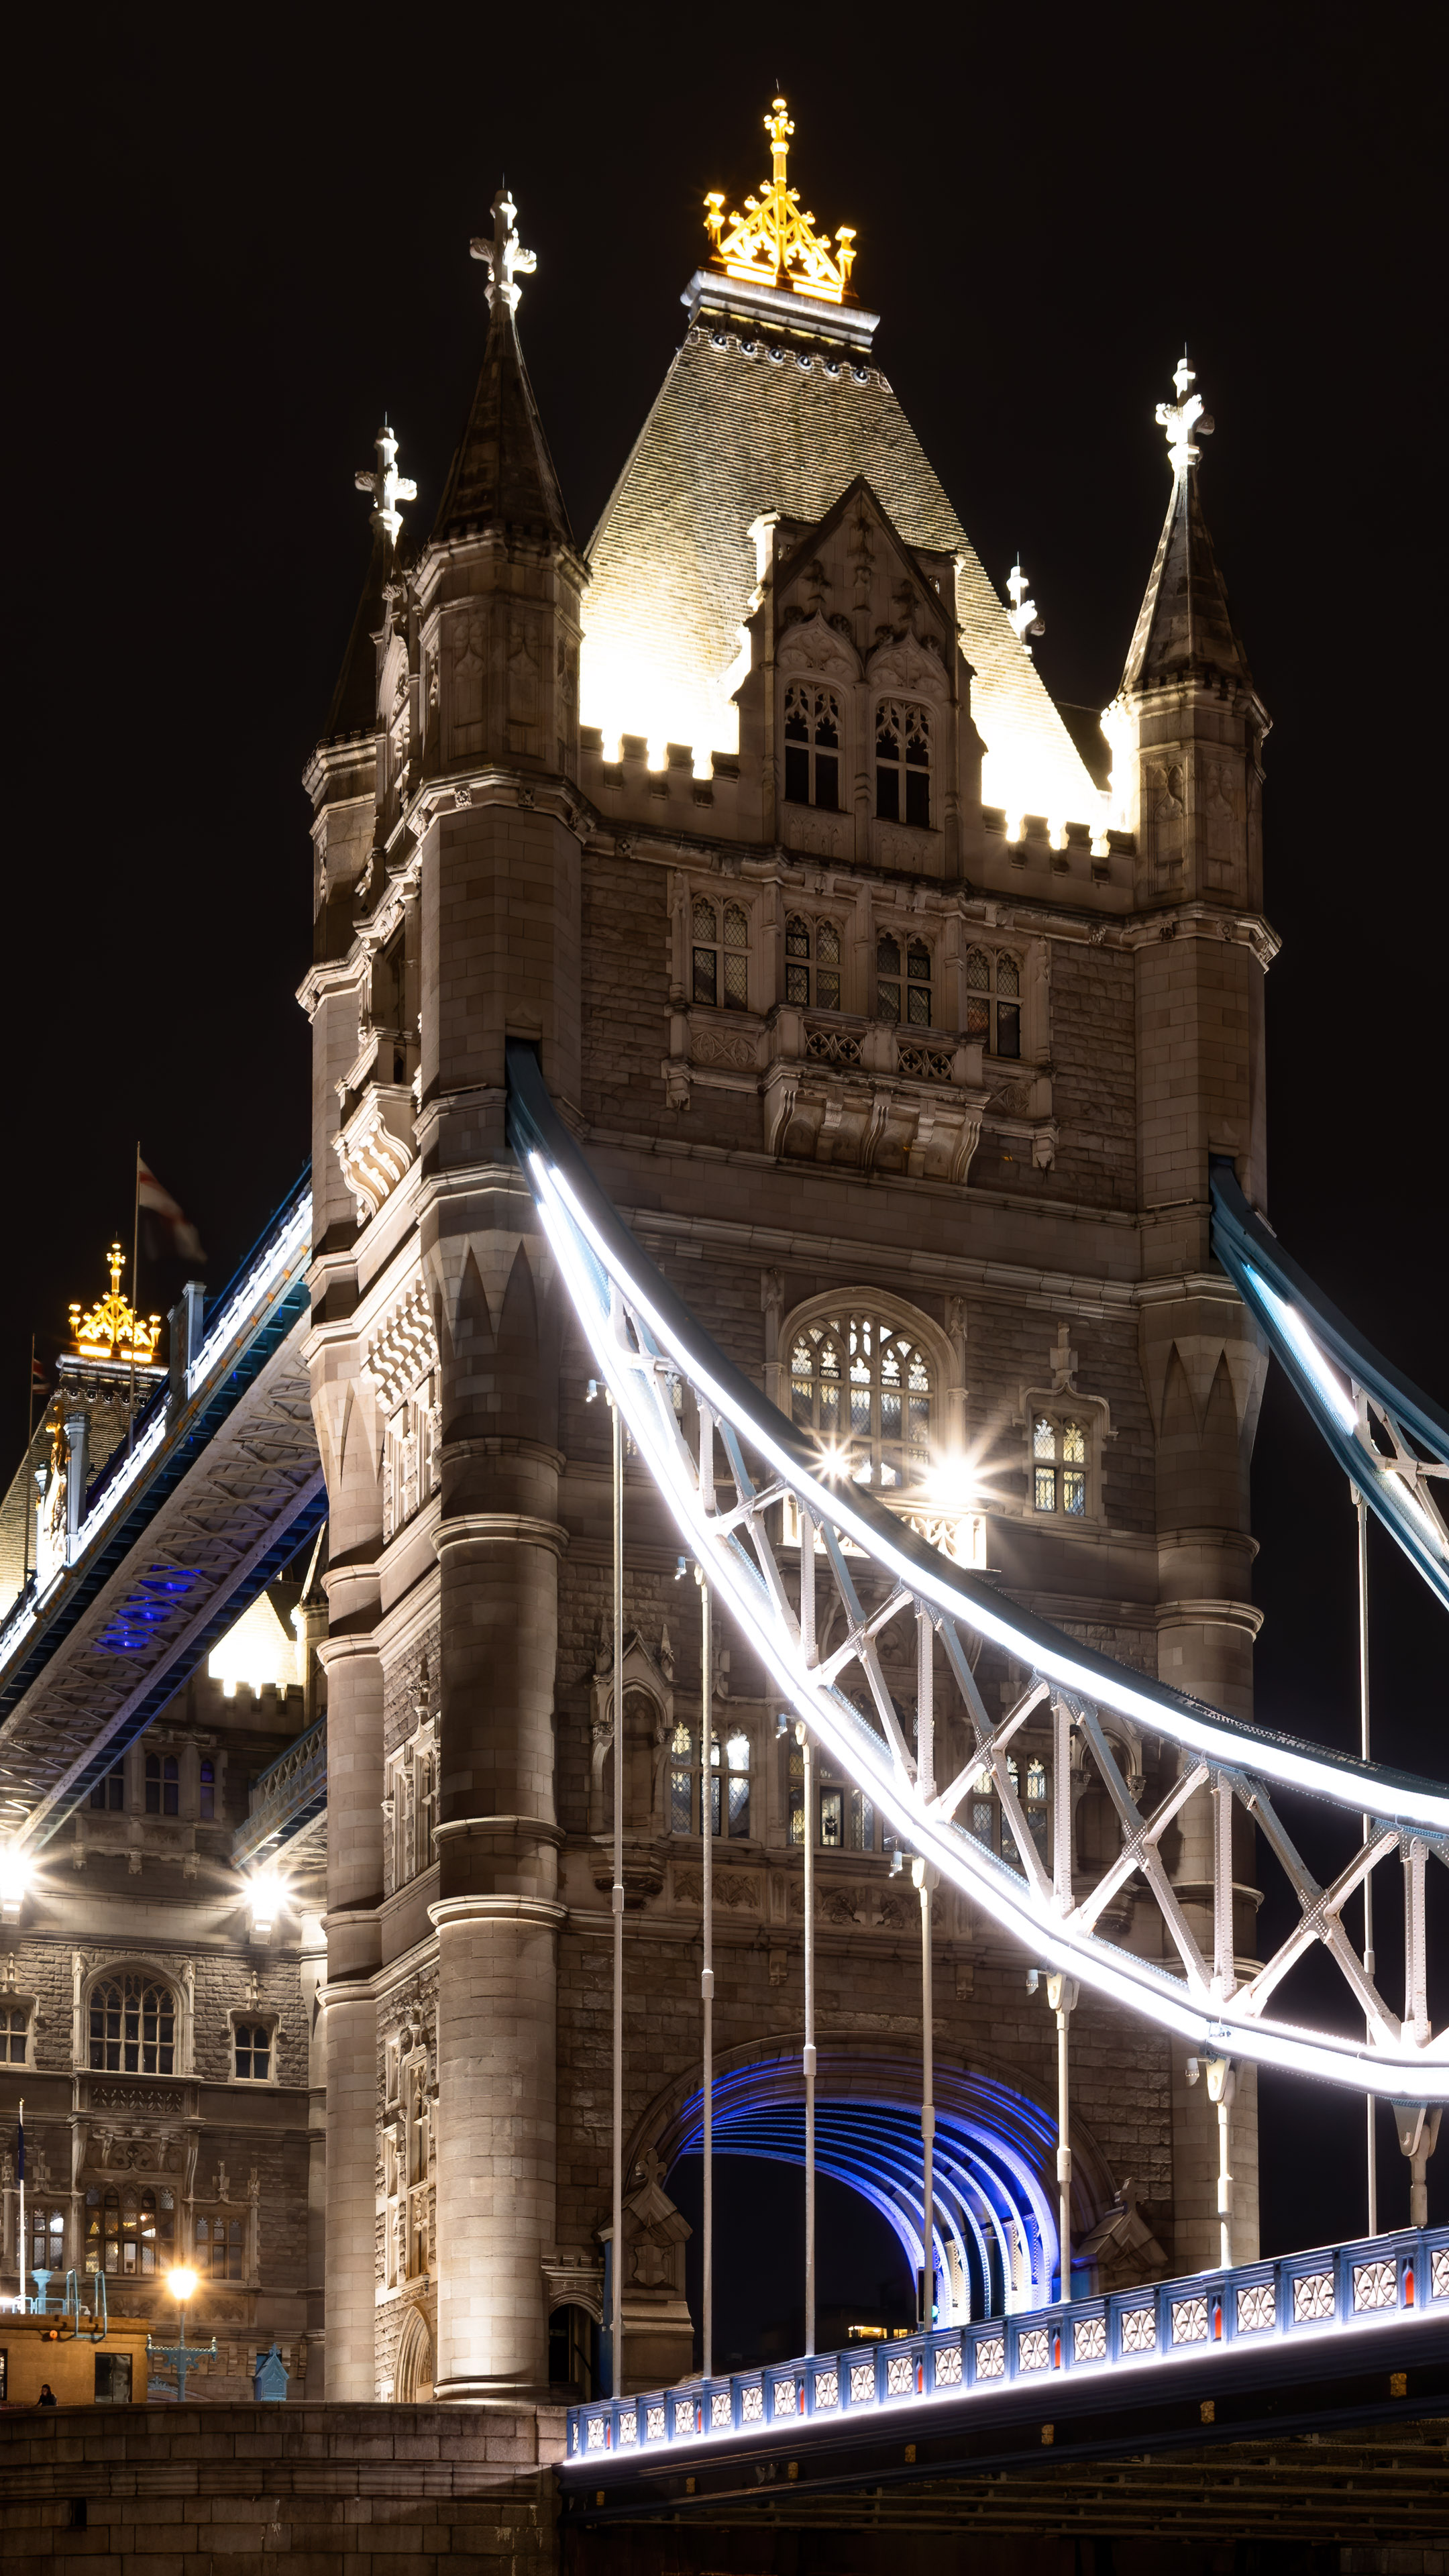 Add a touch of sophistication to your mobile with this wallpaper featuring the iconic Tower Bridge in London at night.